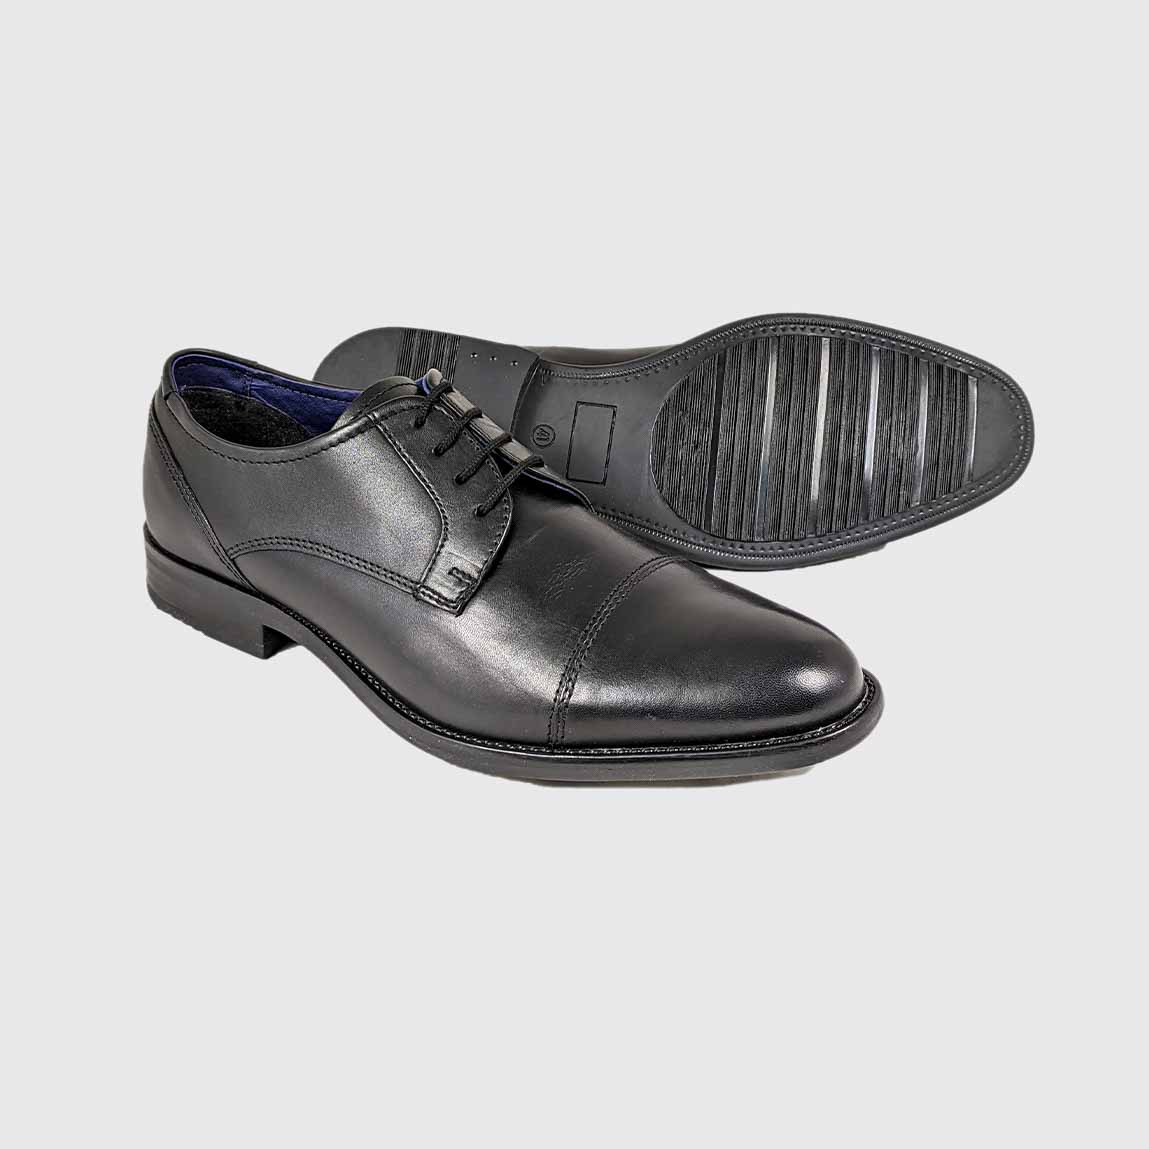 Front view of the pair of Dubarry Derek Black shoes.